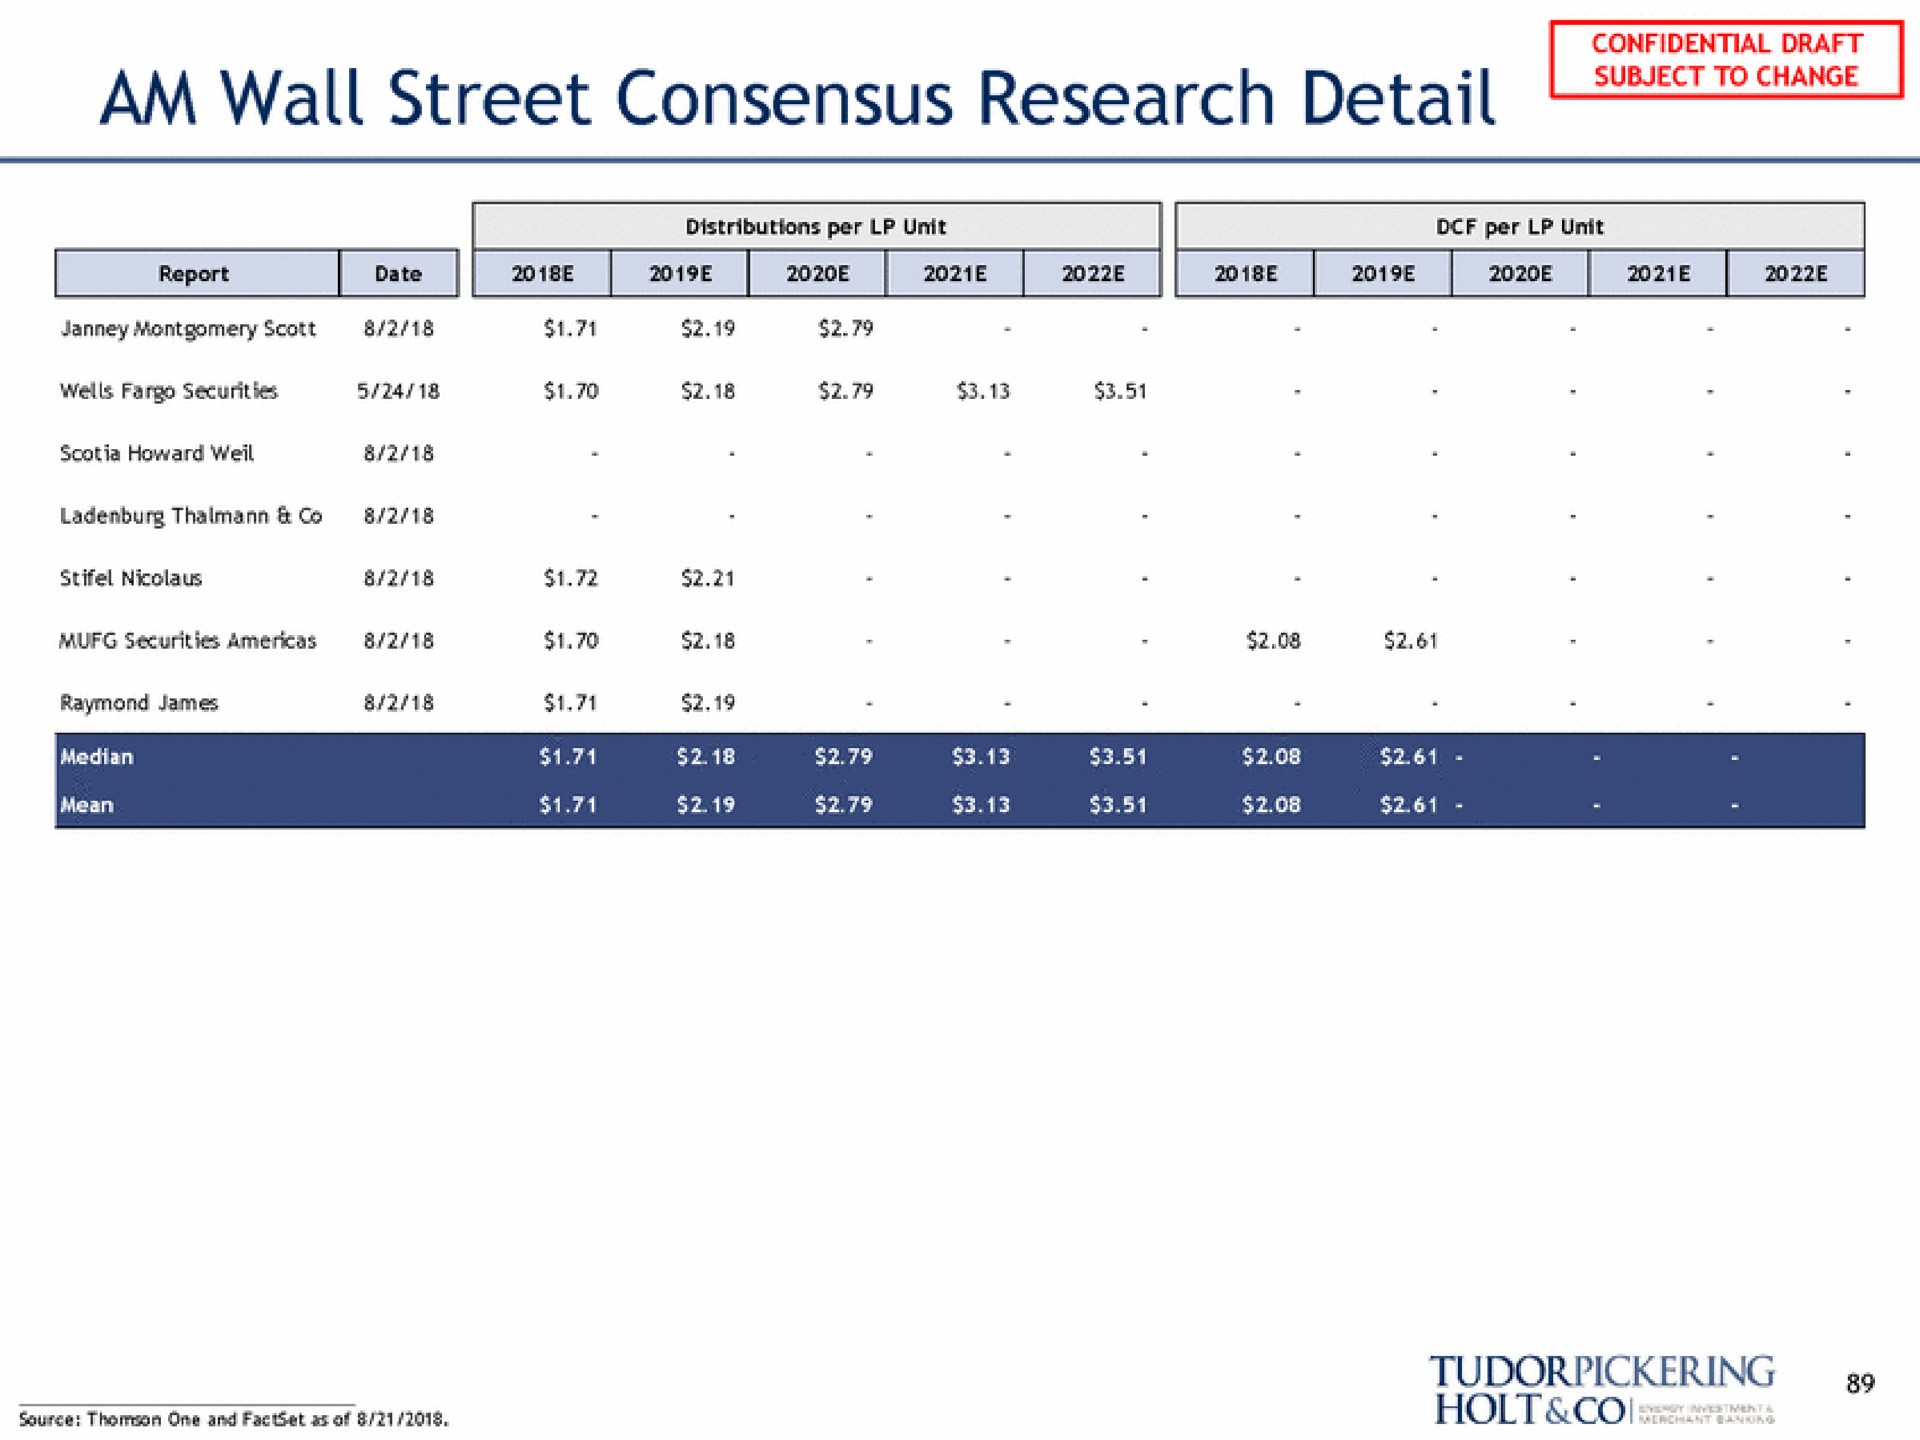 am wall street consensus research detail subject to change | Tudor, Pickering, Holt & Co